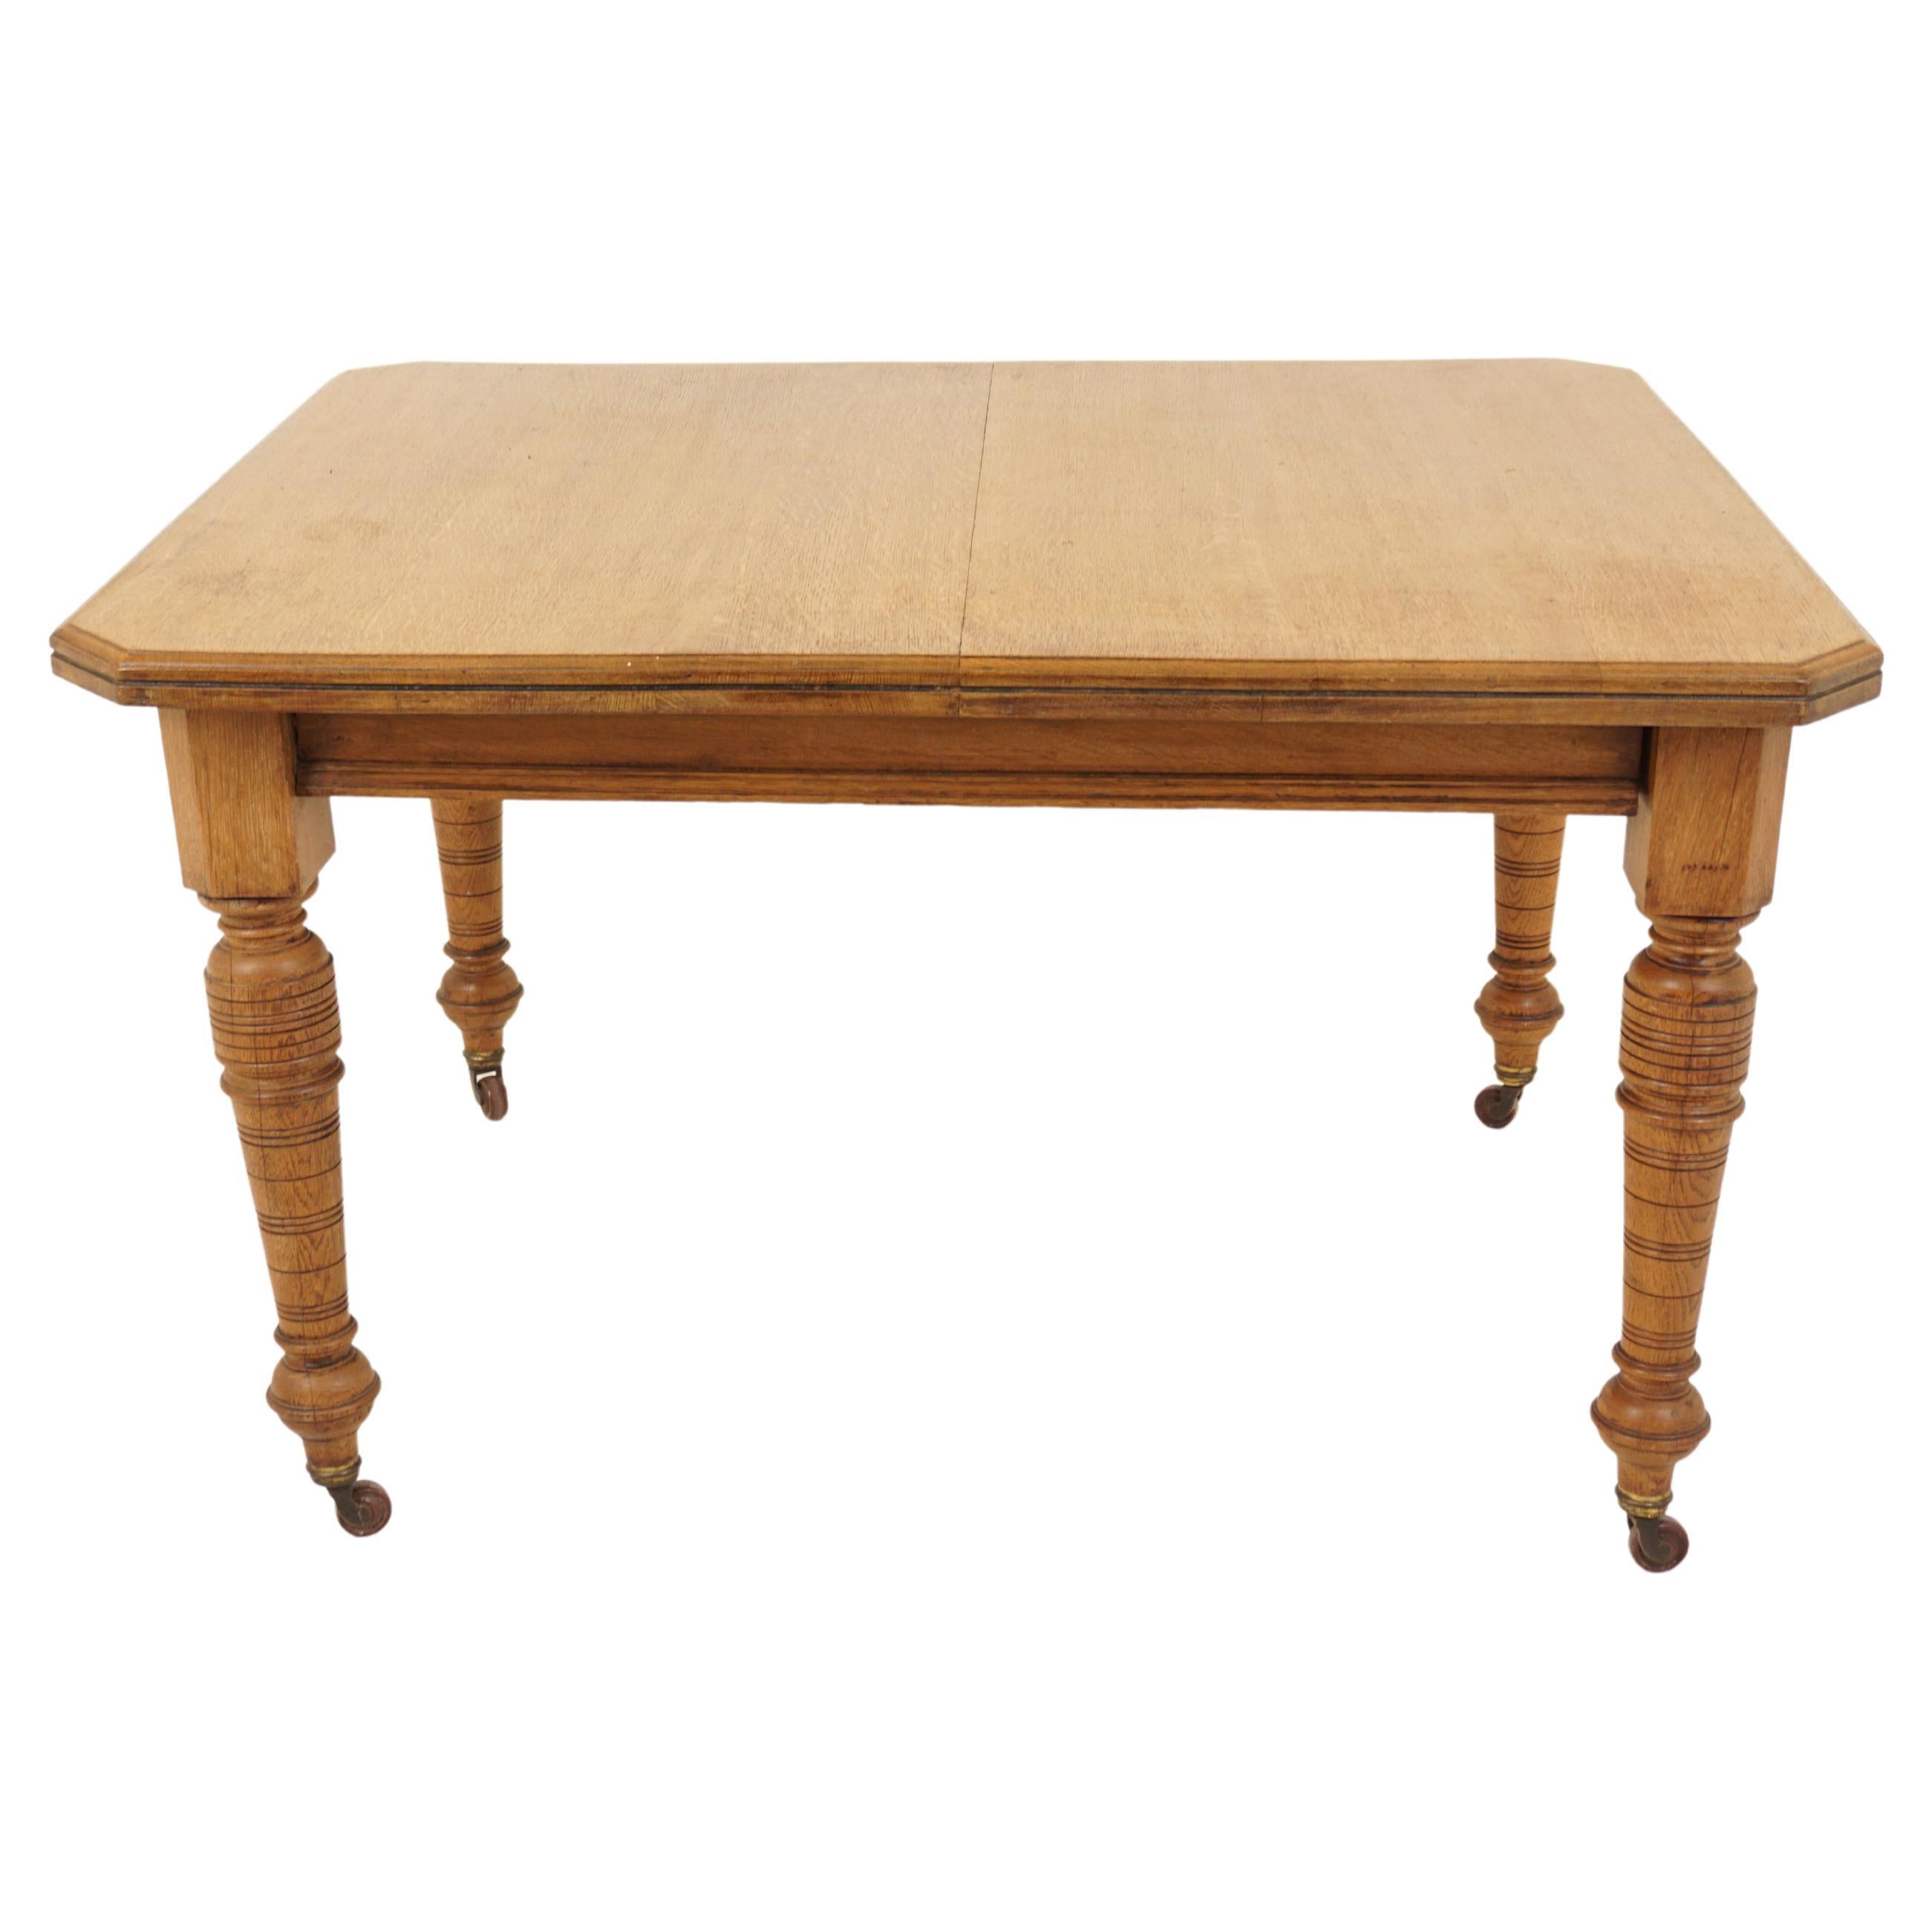 Antique Victorian Oak Dining Table With 2 Leaves, Scotland 1880, B2587